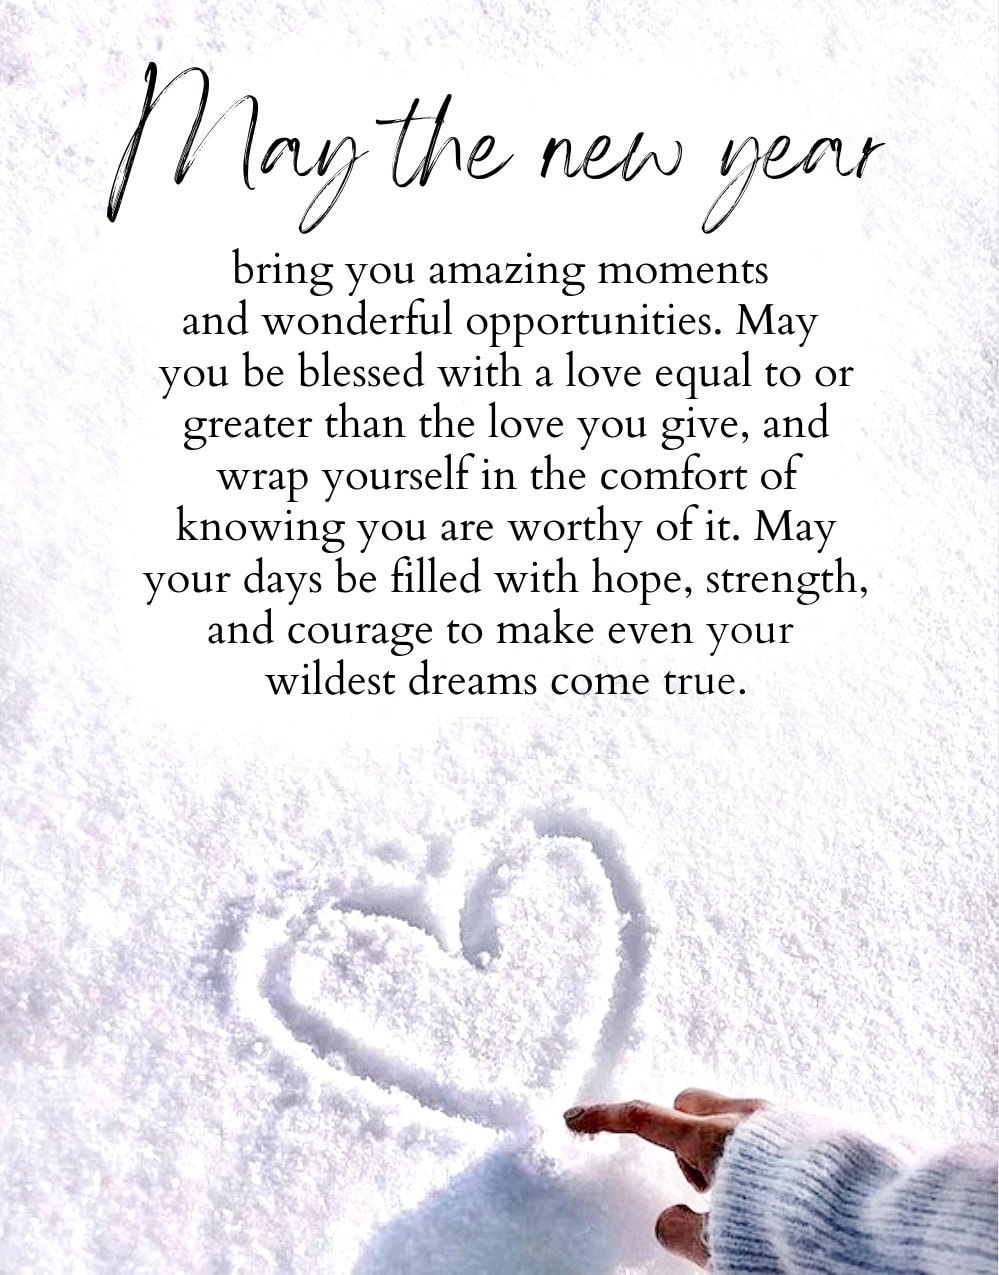 May the new year bring you amazing moments and wonderful opportunities